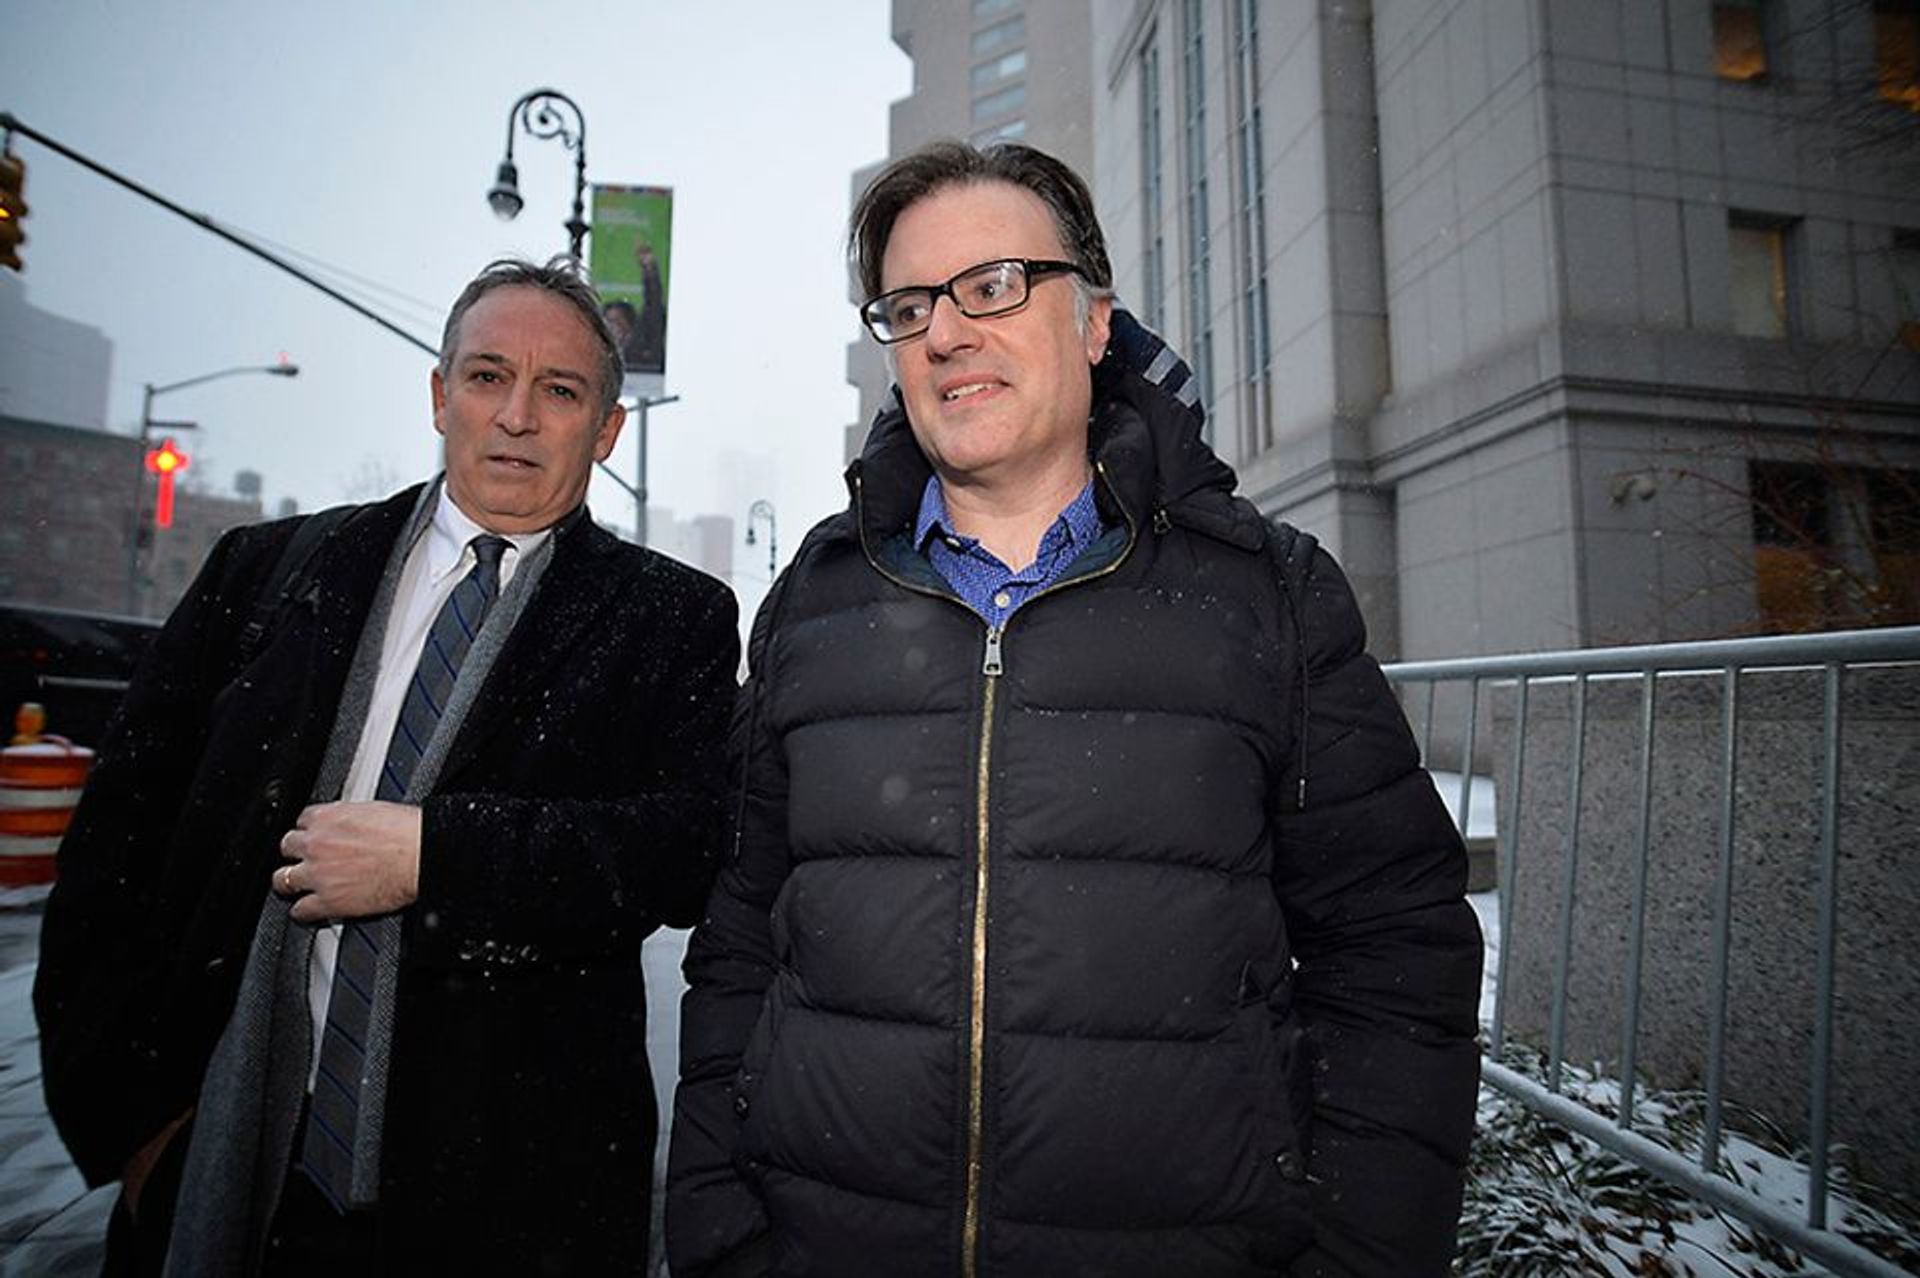 Former art dealer Ezra Chowaiki leaves Federal Court with his lawyer after his arraignment in 2018 © Matthew McDermott/Polaris